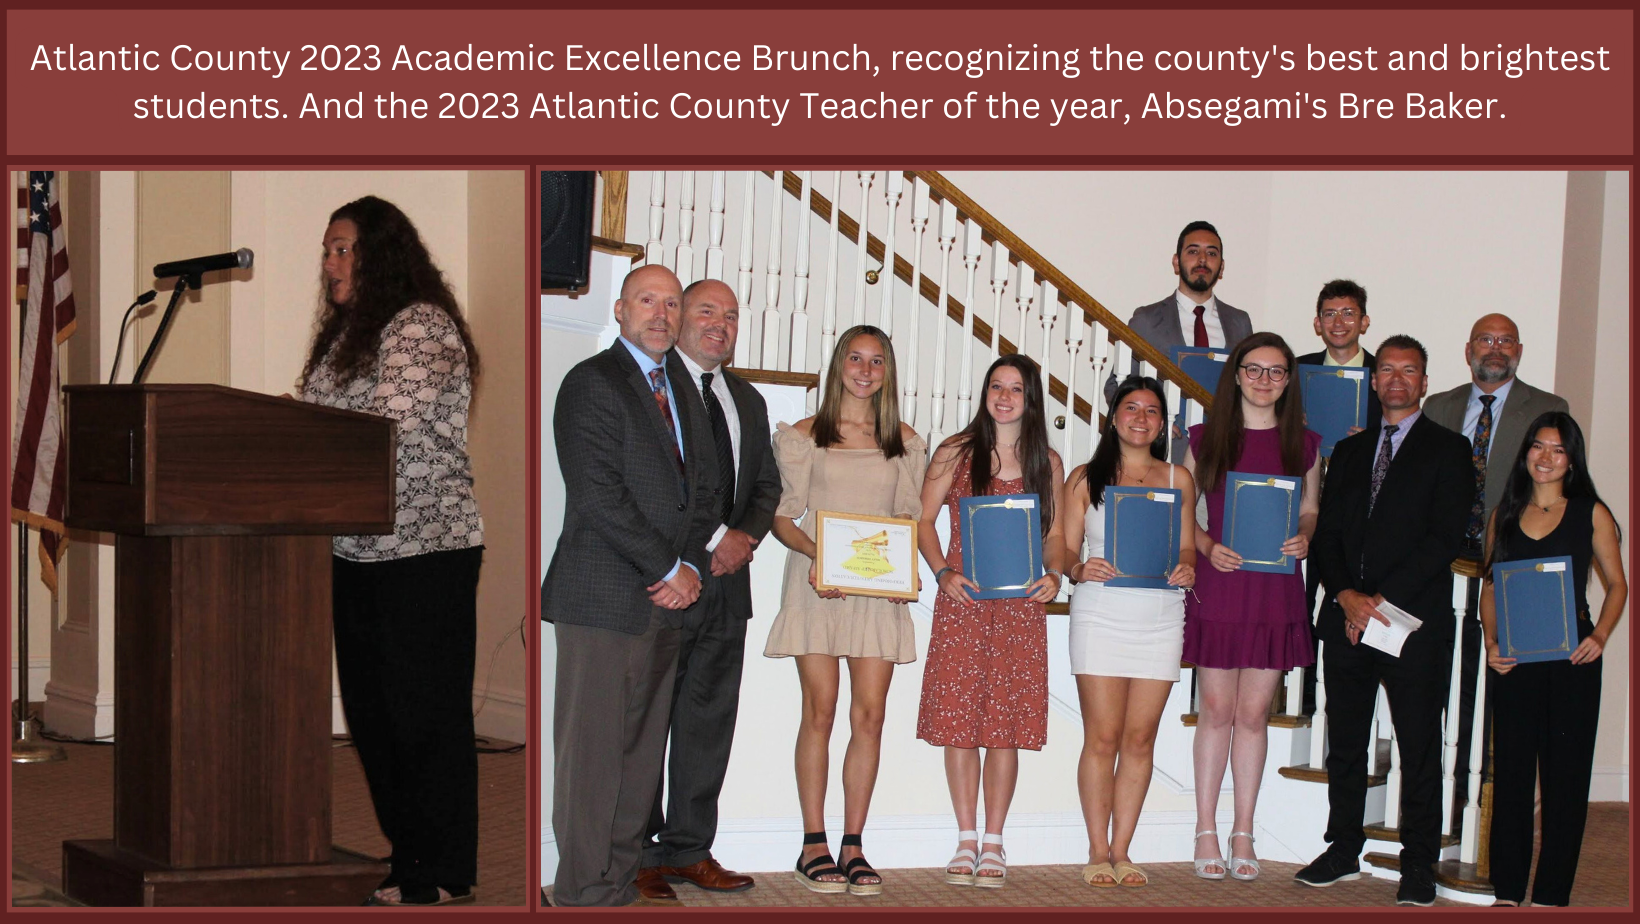 Atlantic County 2023 Academic Excellence Brunch, recognizing the county's best and brightest students. And the 2023 Atlantic County Teacher of the year, Absegami's Bre Baker.